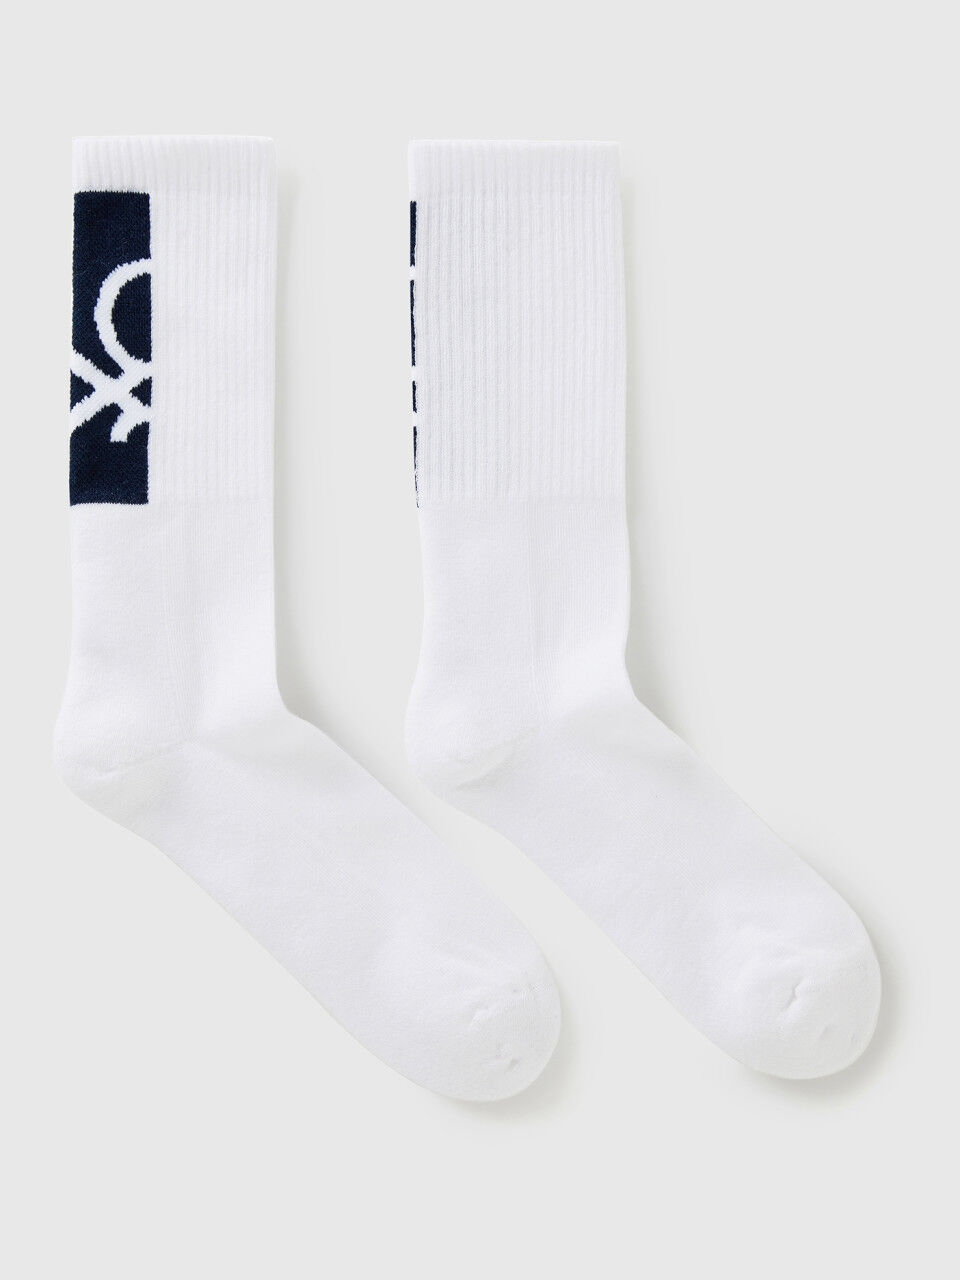 Terry socks with logo